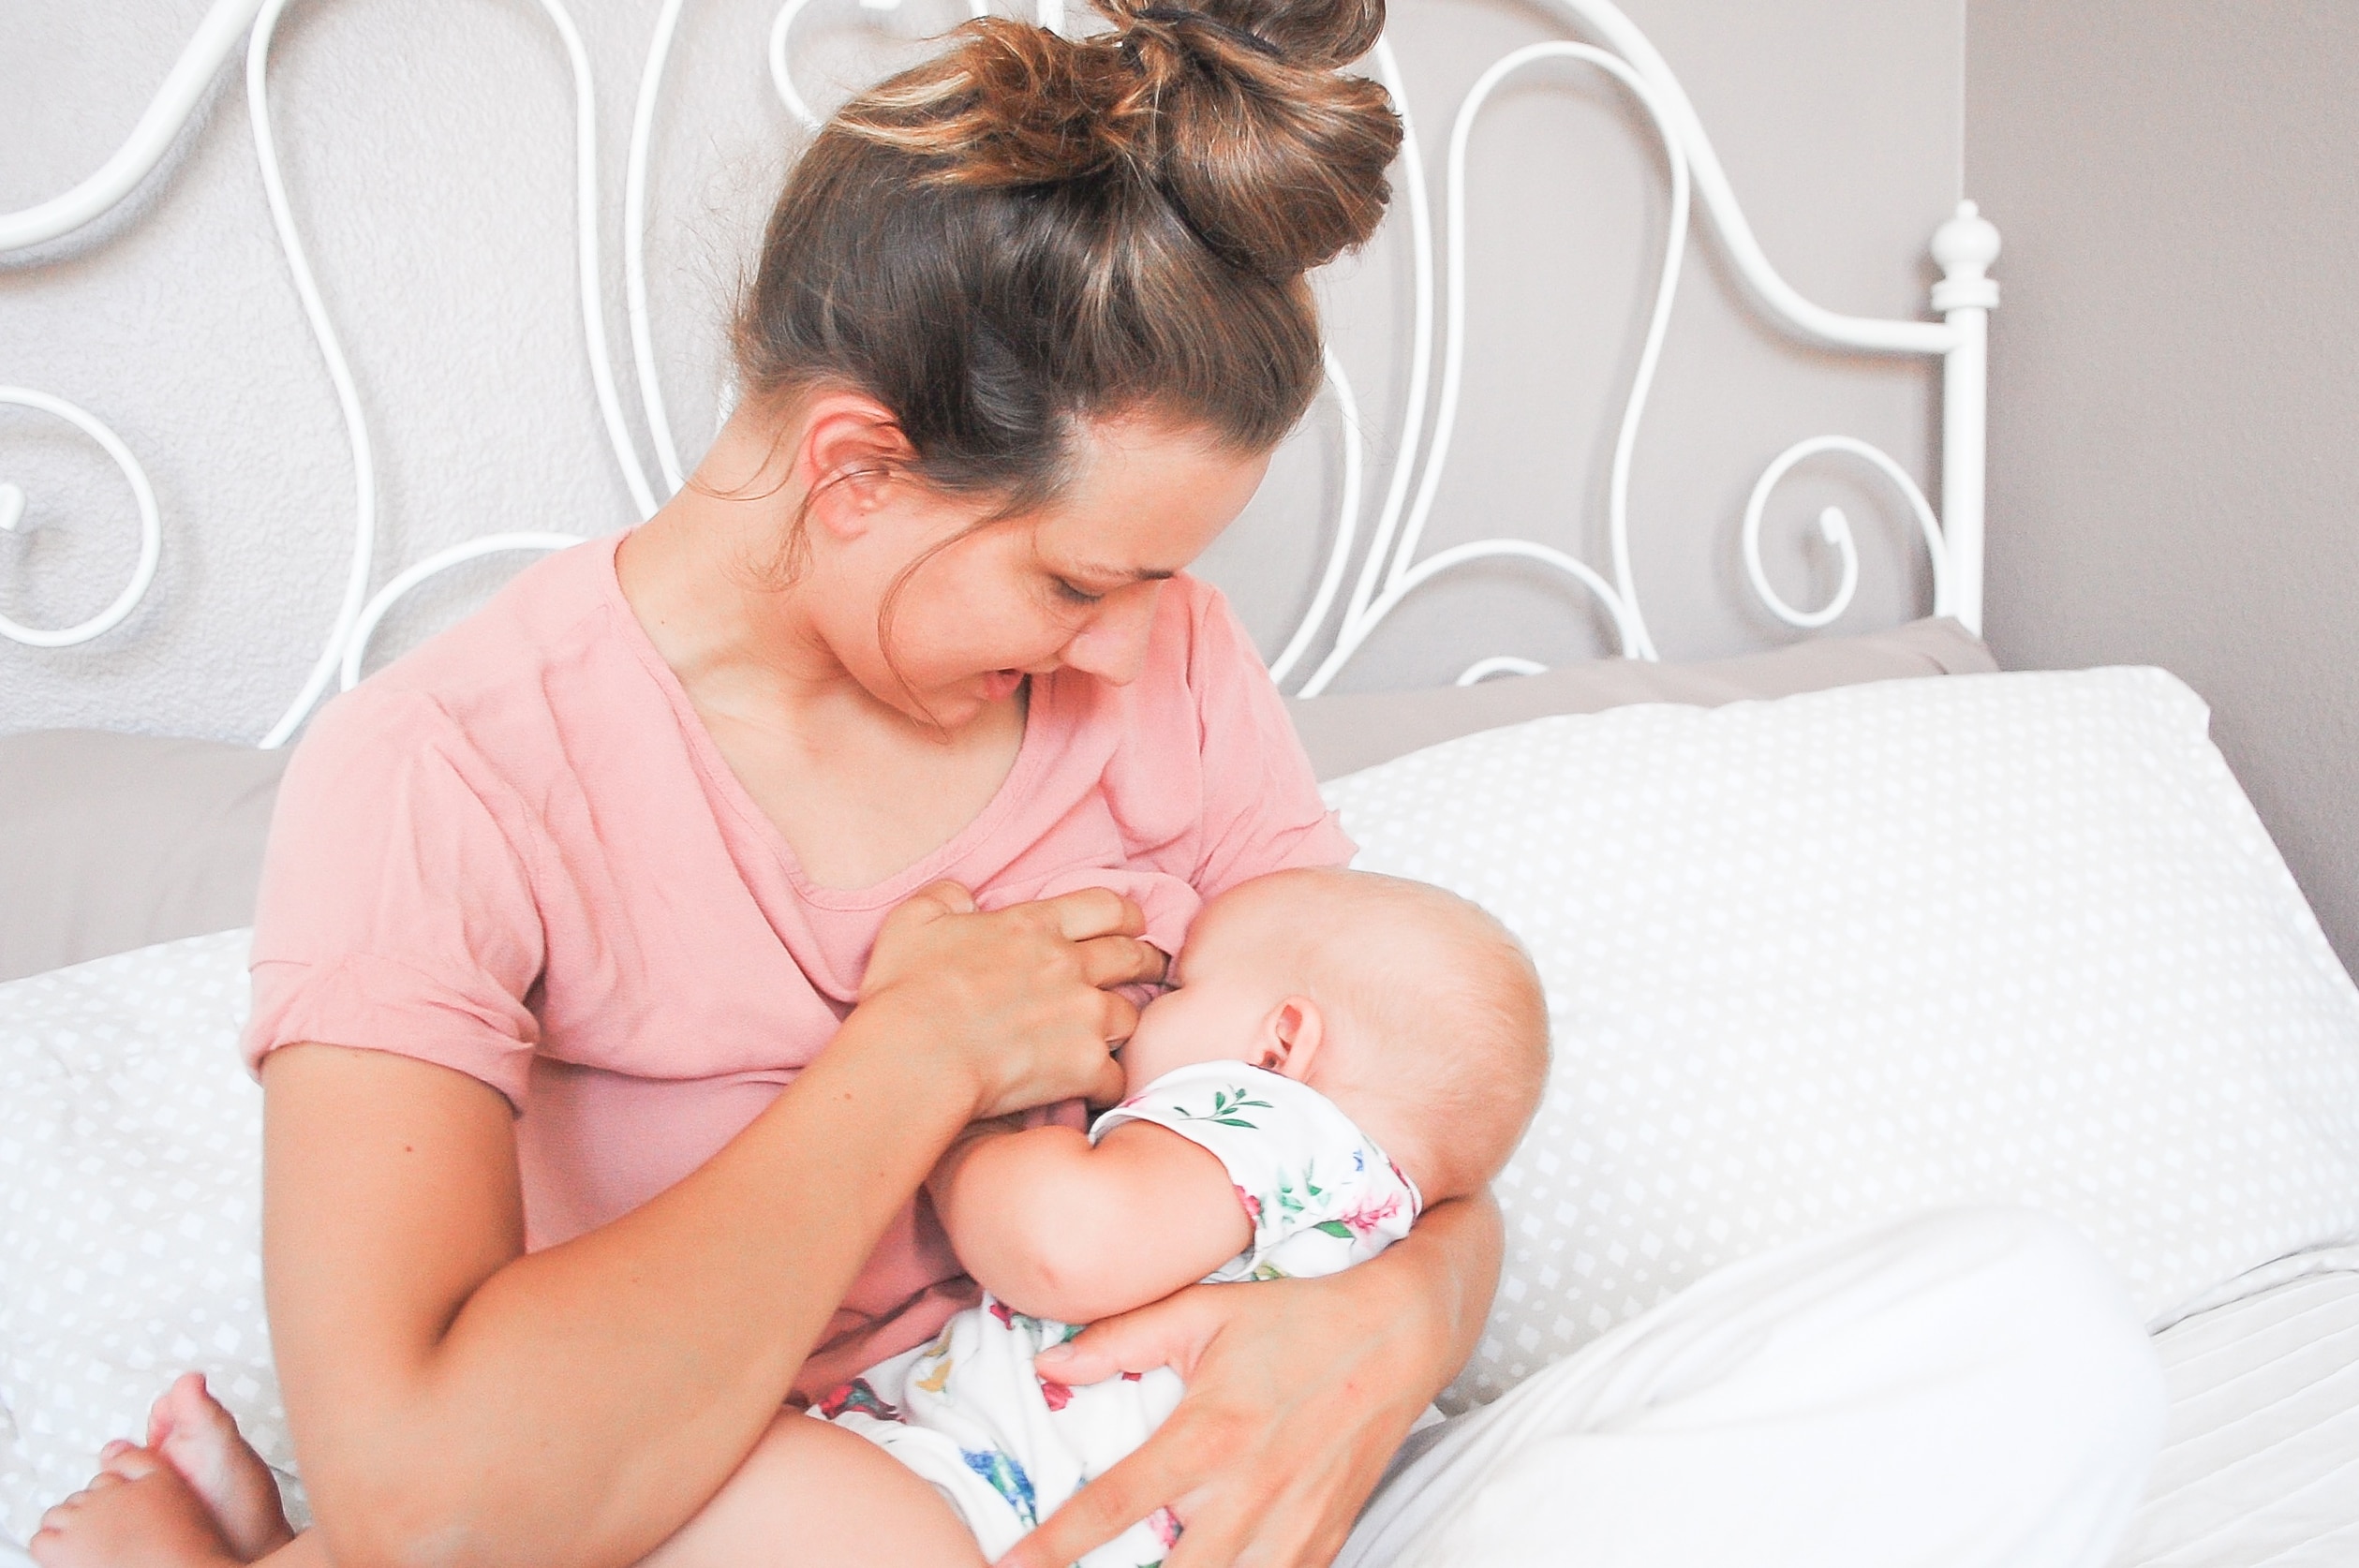 11 Breastfeeding Truth Bombs: The good, the bad, and the embarrassing